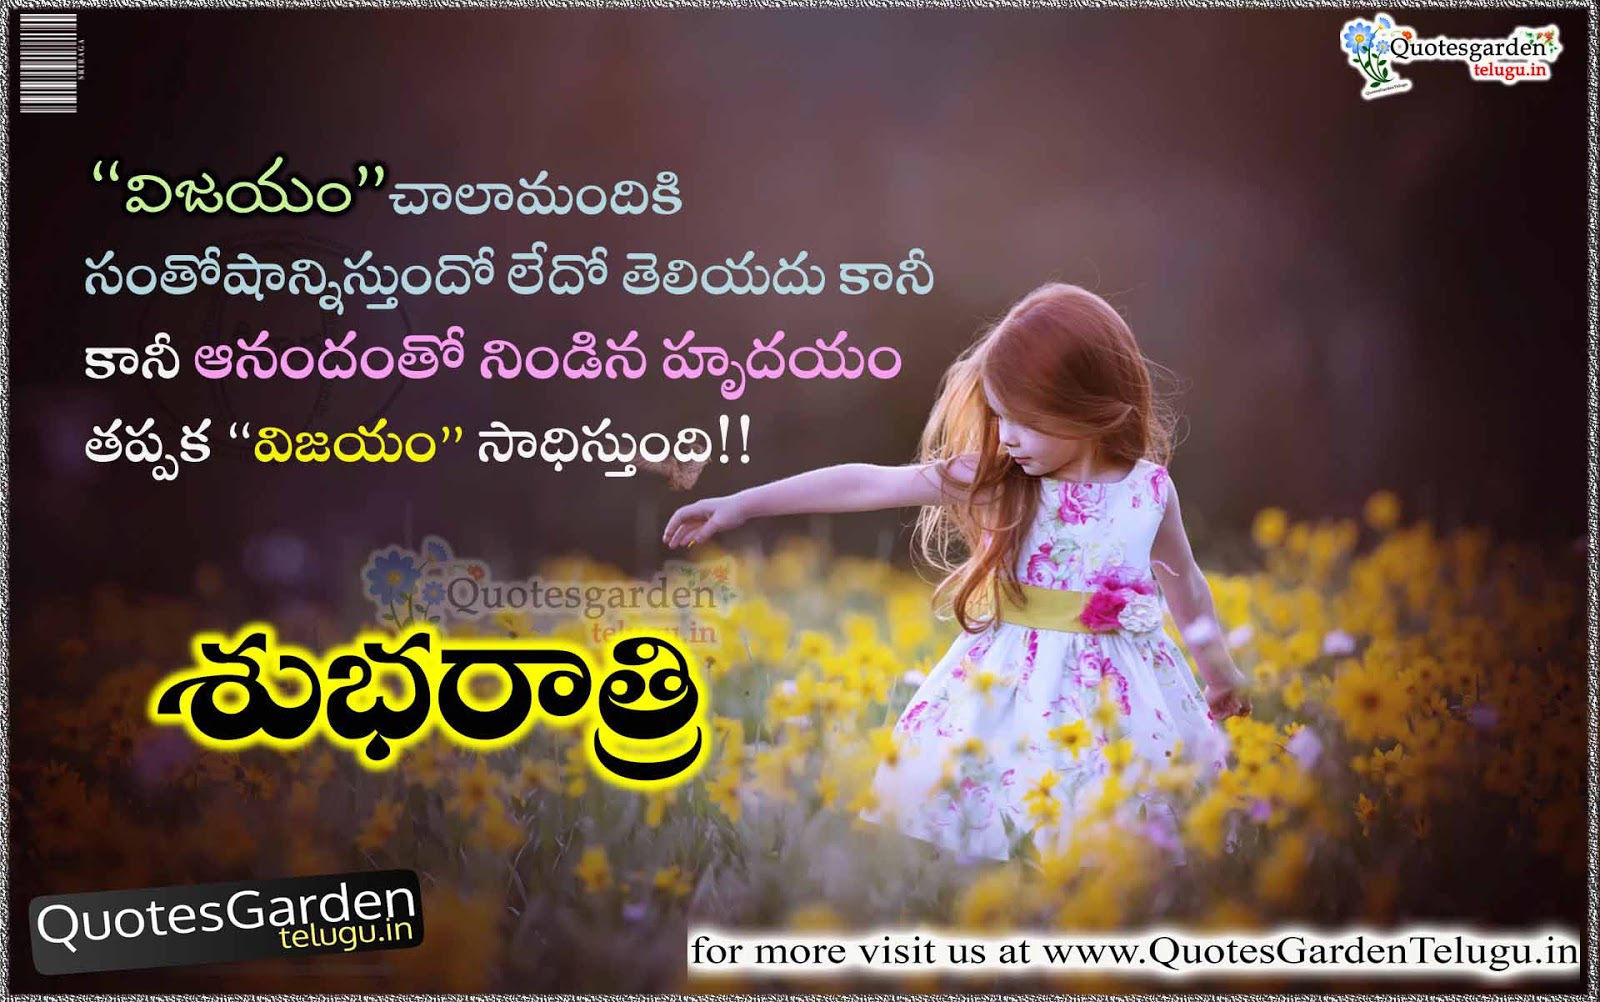 Telugu Good night wishes with success and happiness quotes ...